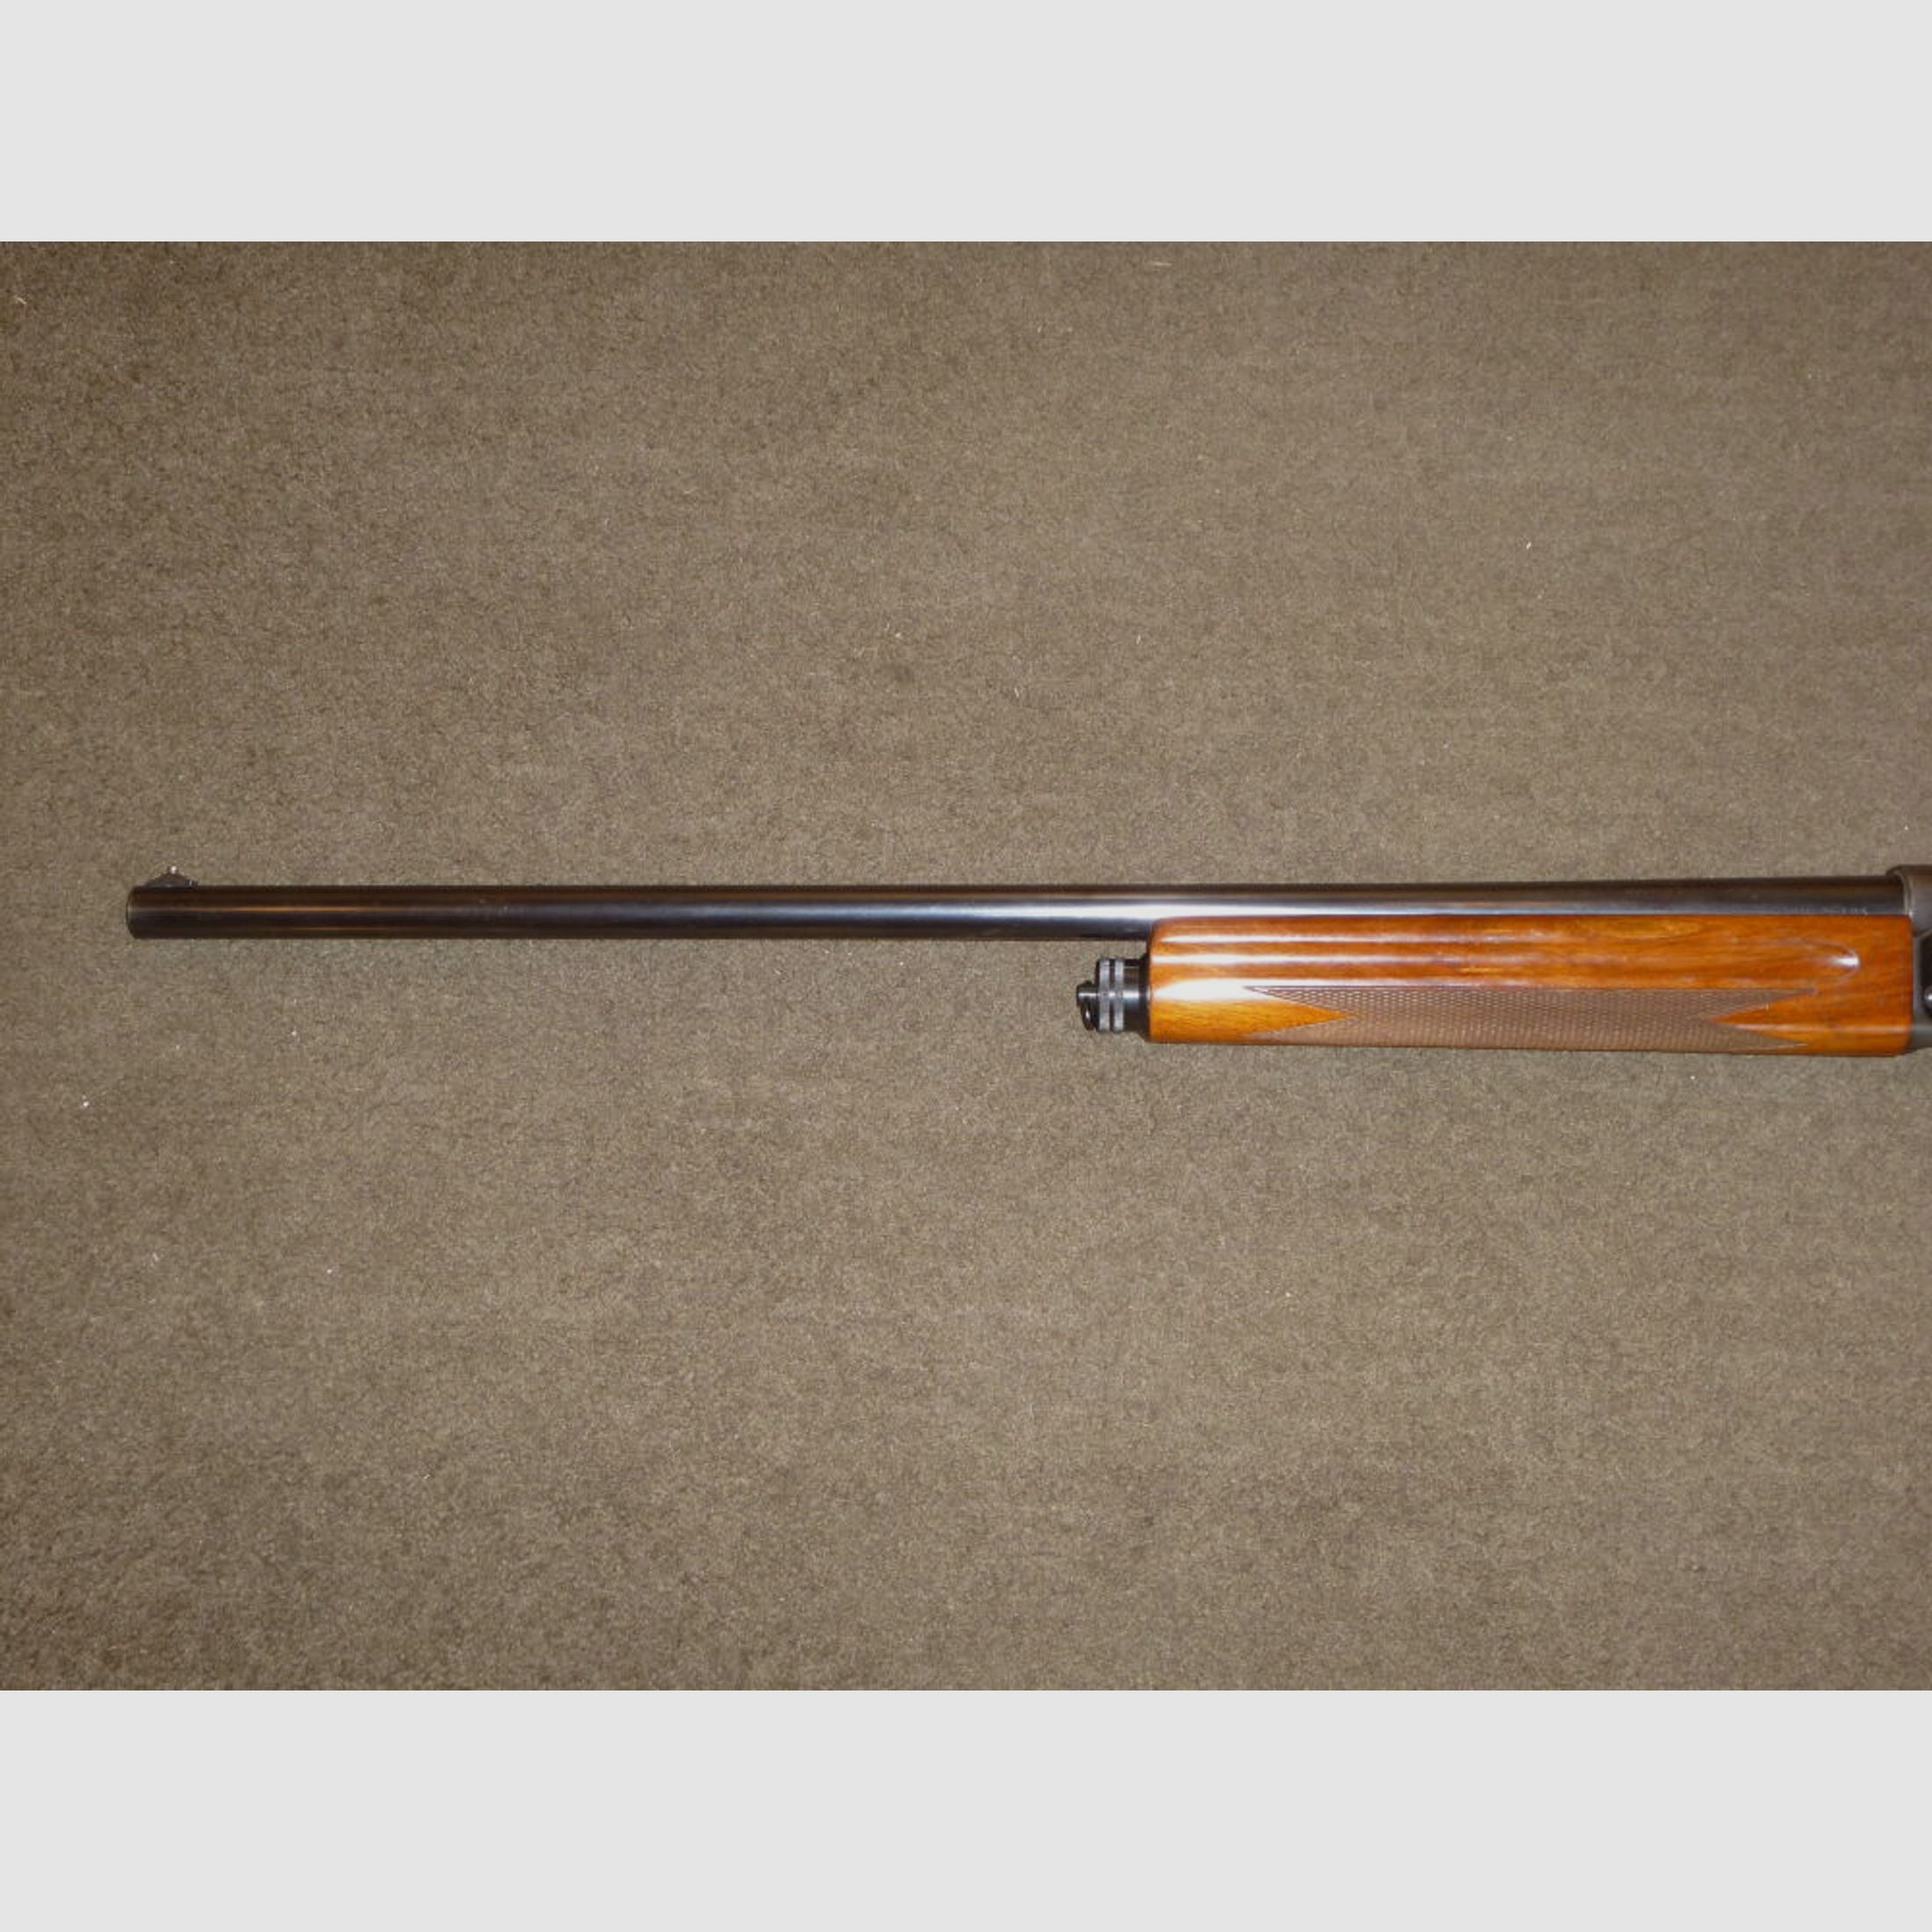 FN	 Browning Auto 5